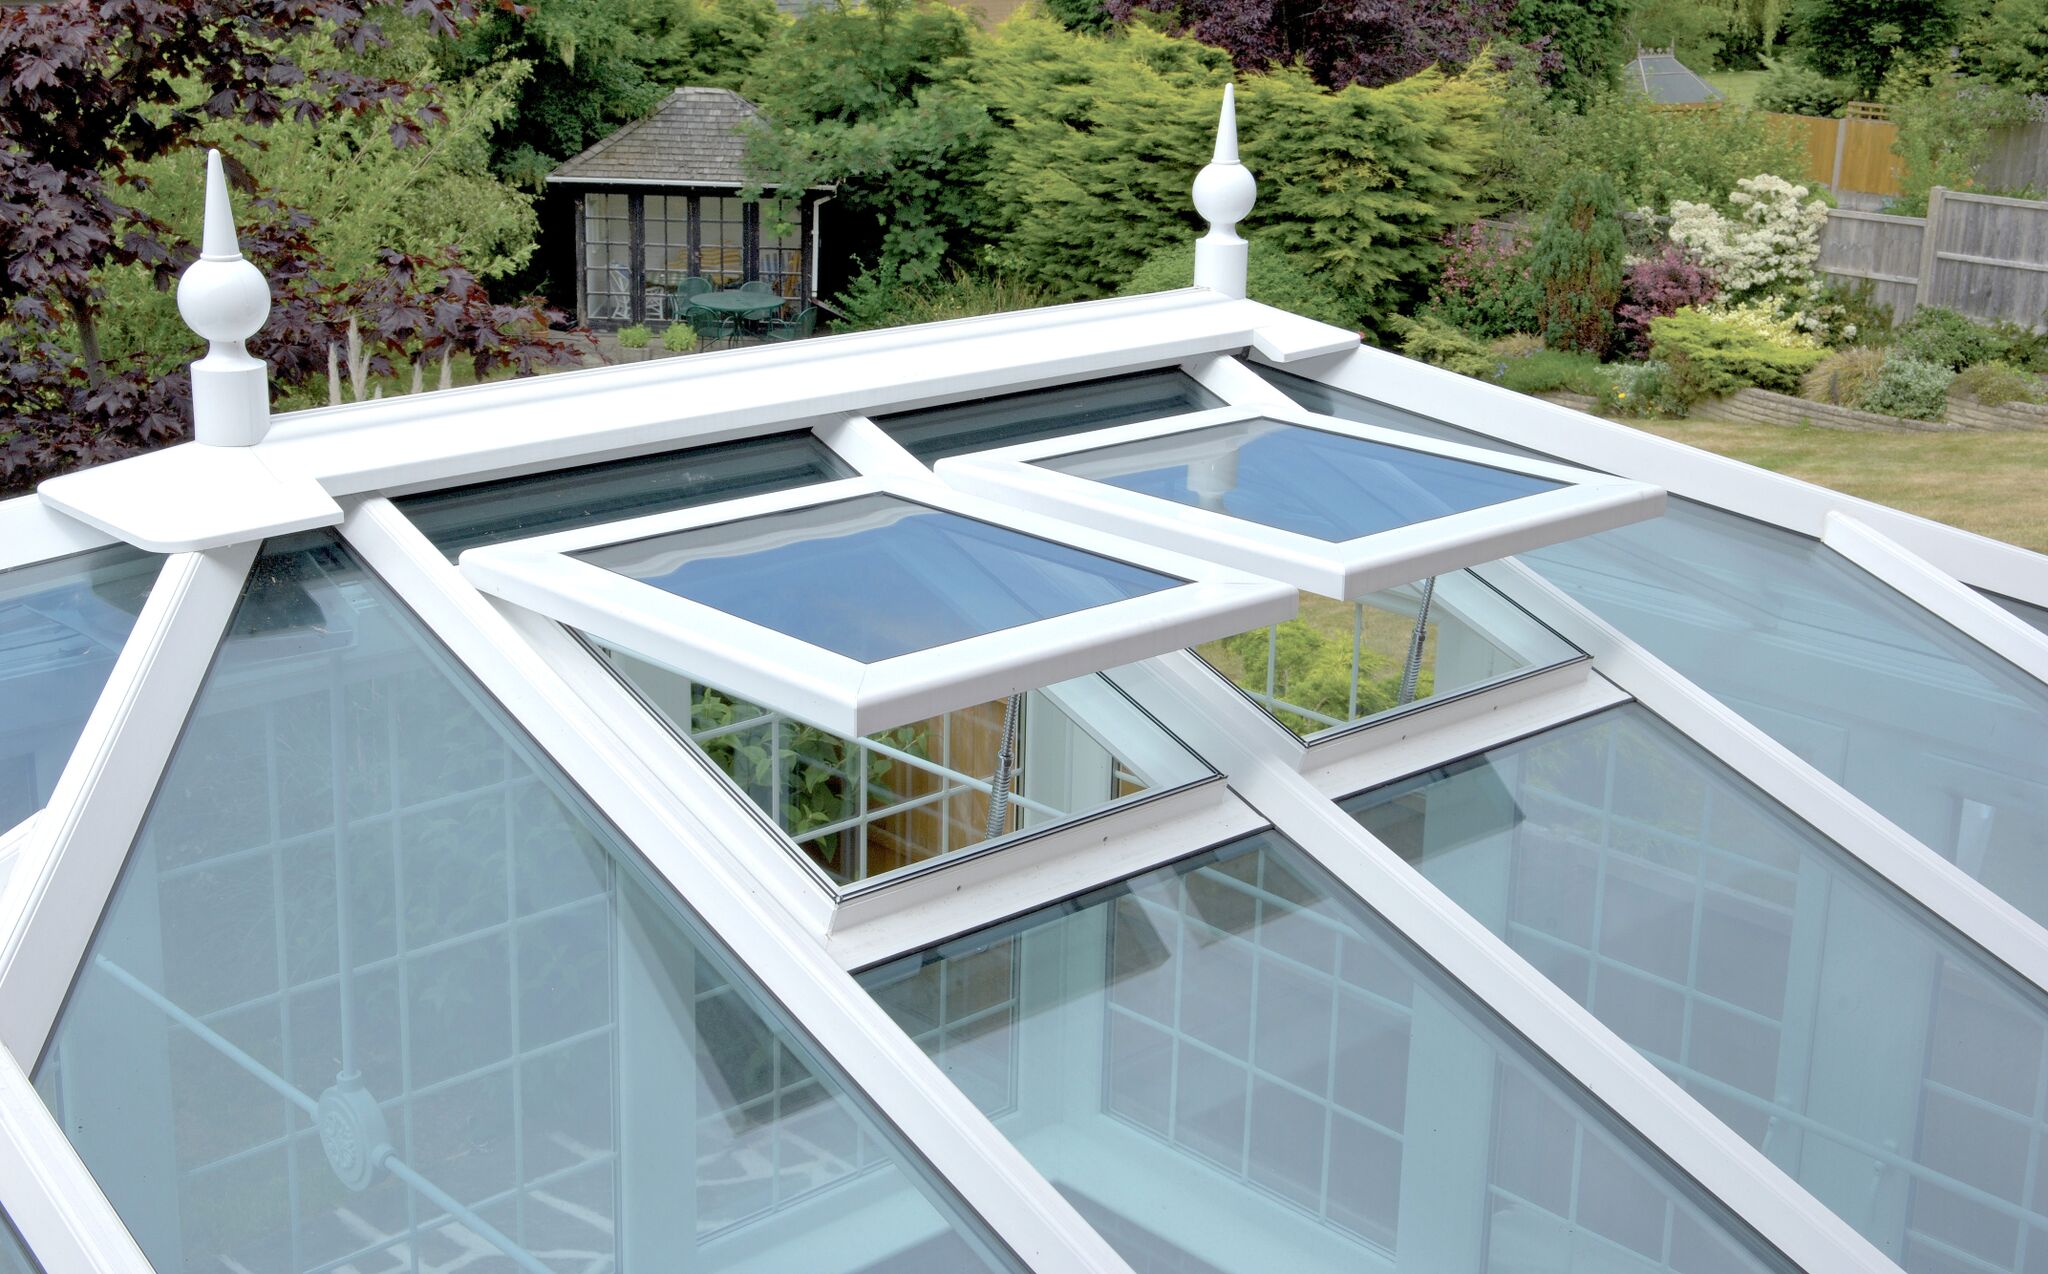 conservatory roof